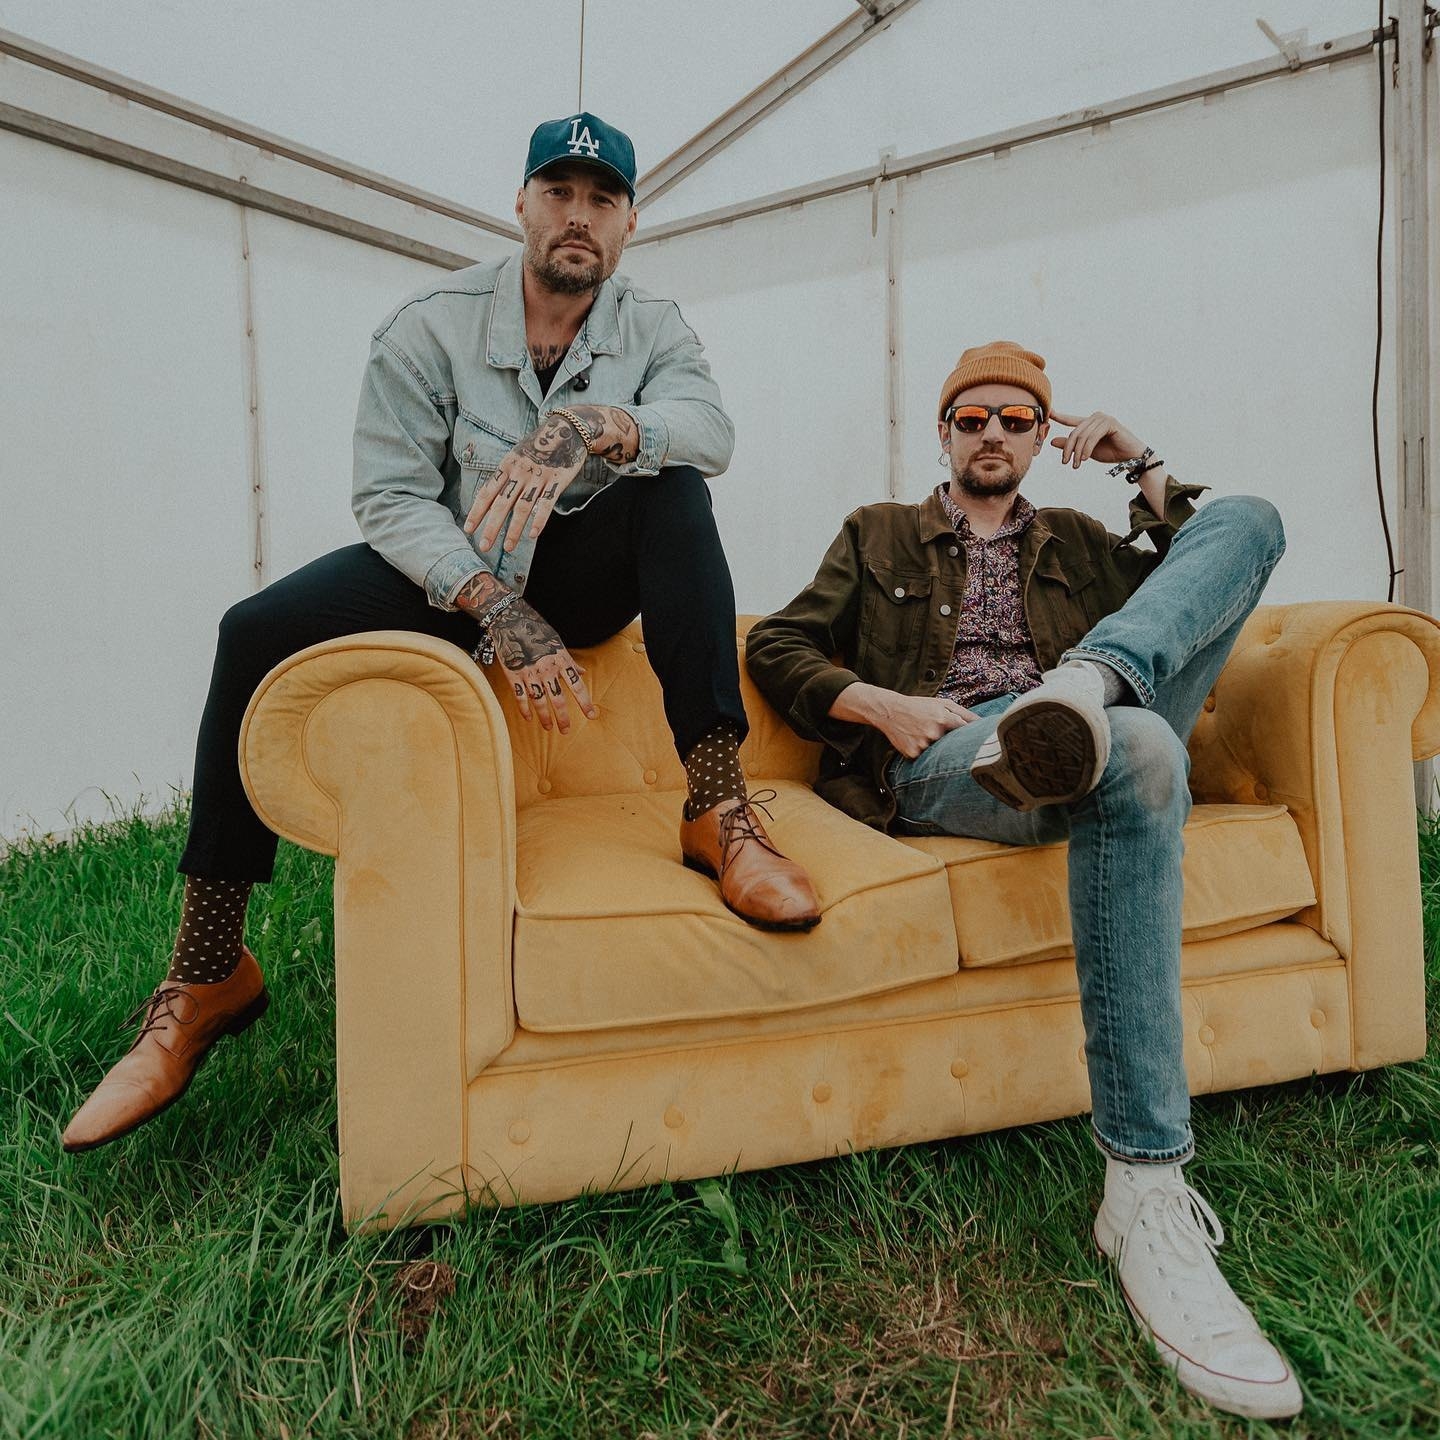 emarosa band memebers sitting on a couch